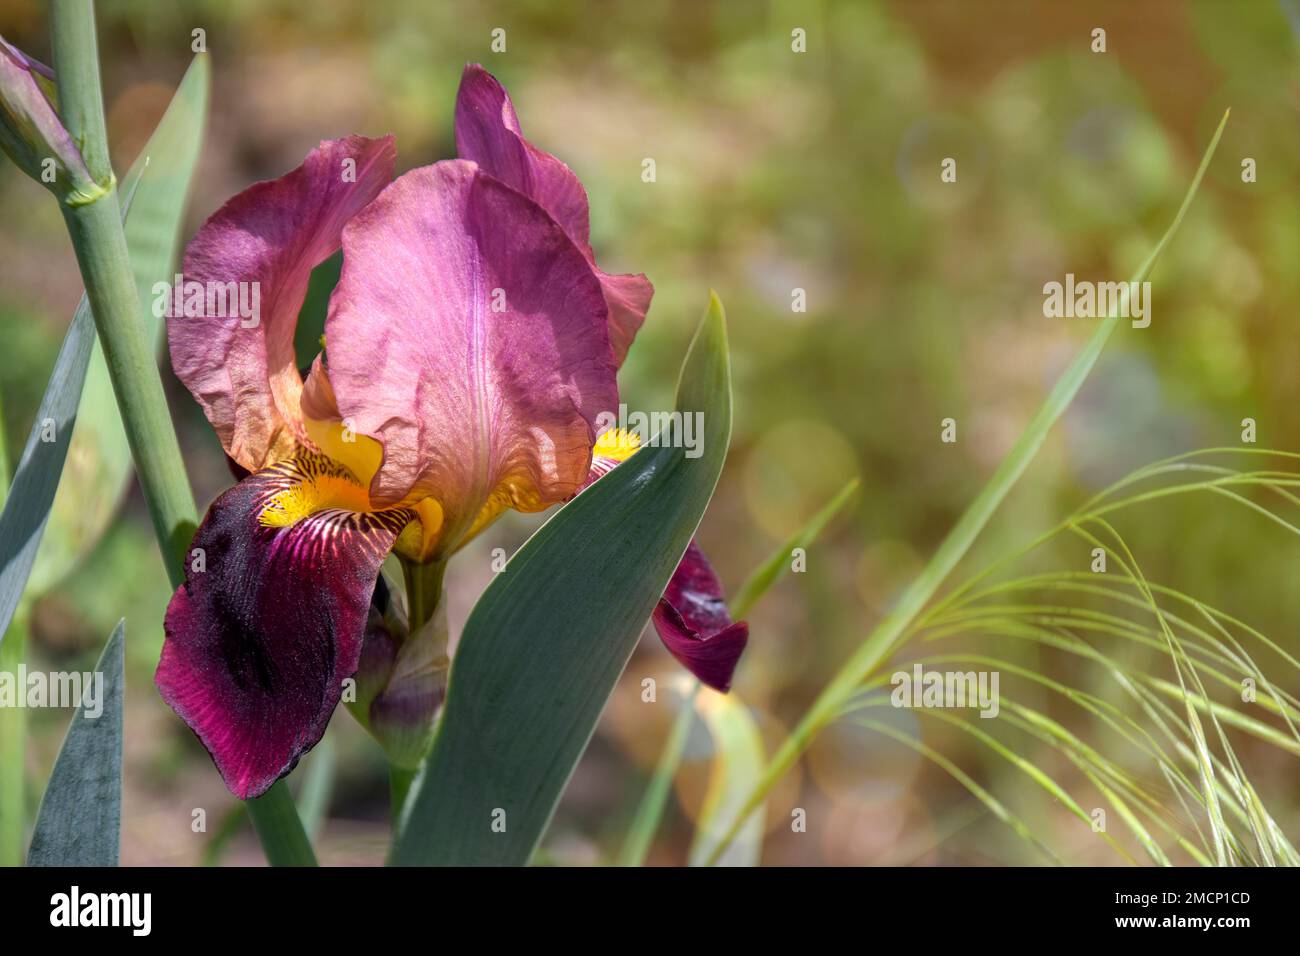 Unusual burgundy Iris flower (Iridaceae family) in garden on green blurred background. Close-up. Selective focus. Beauty in nature. Copy space. Stock Photo